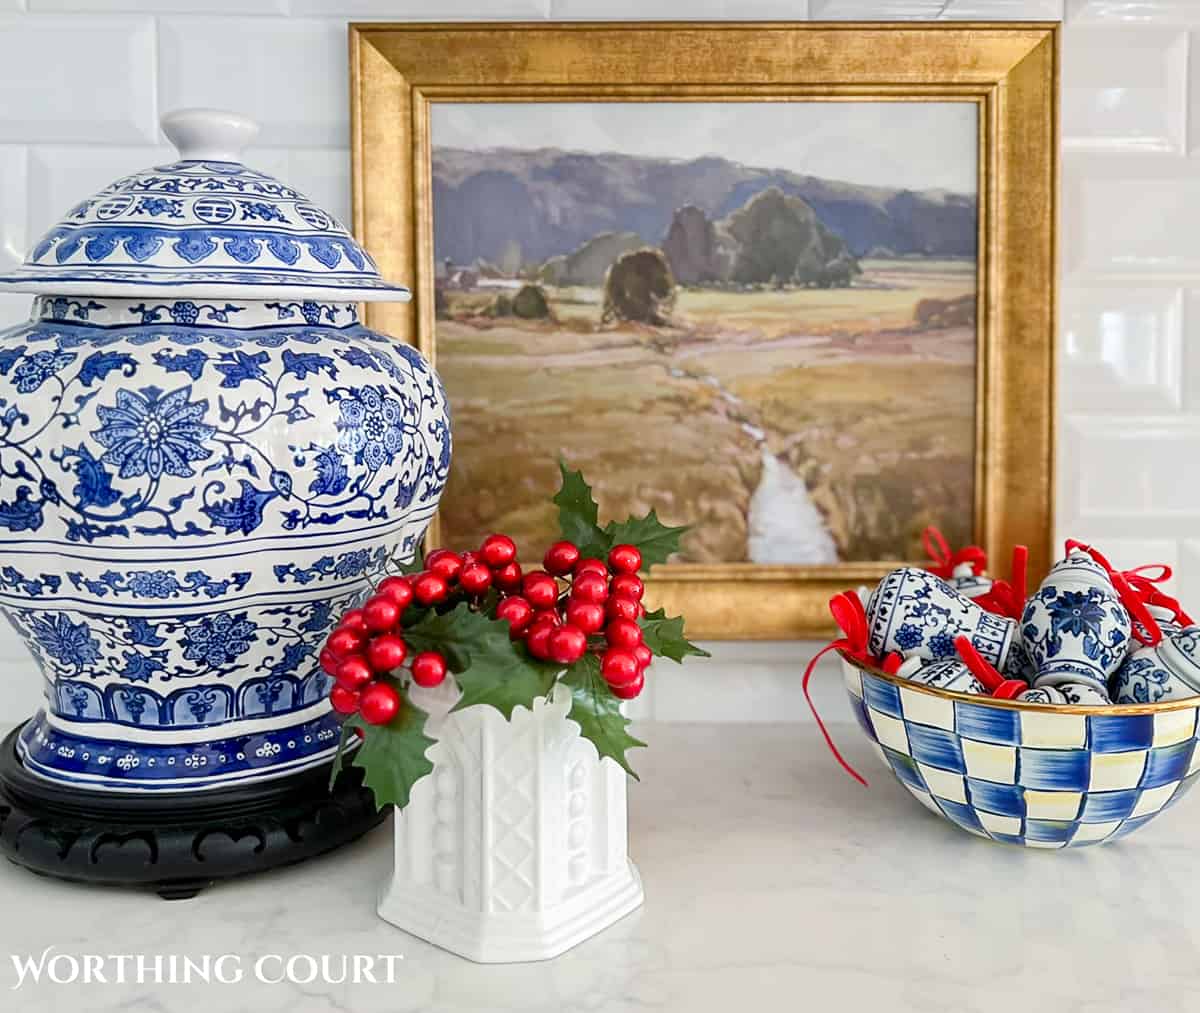 Christmas vignette on a kitchen counter with blue and white accessories and red berries in a small vase